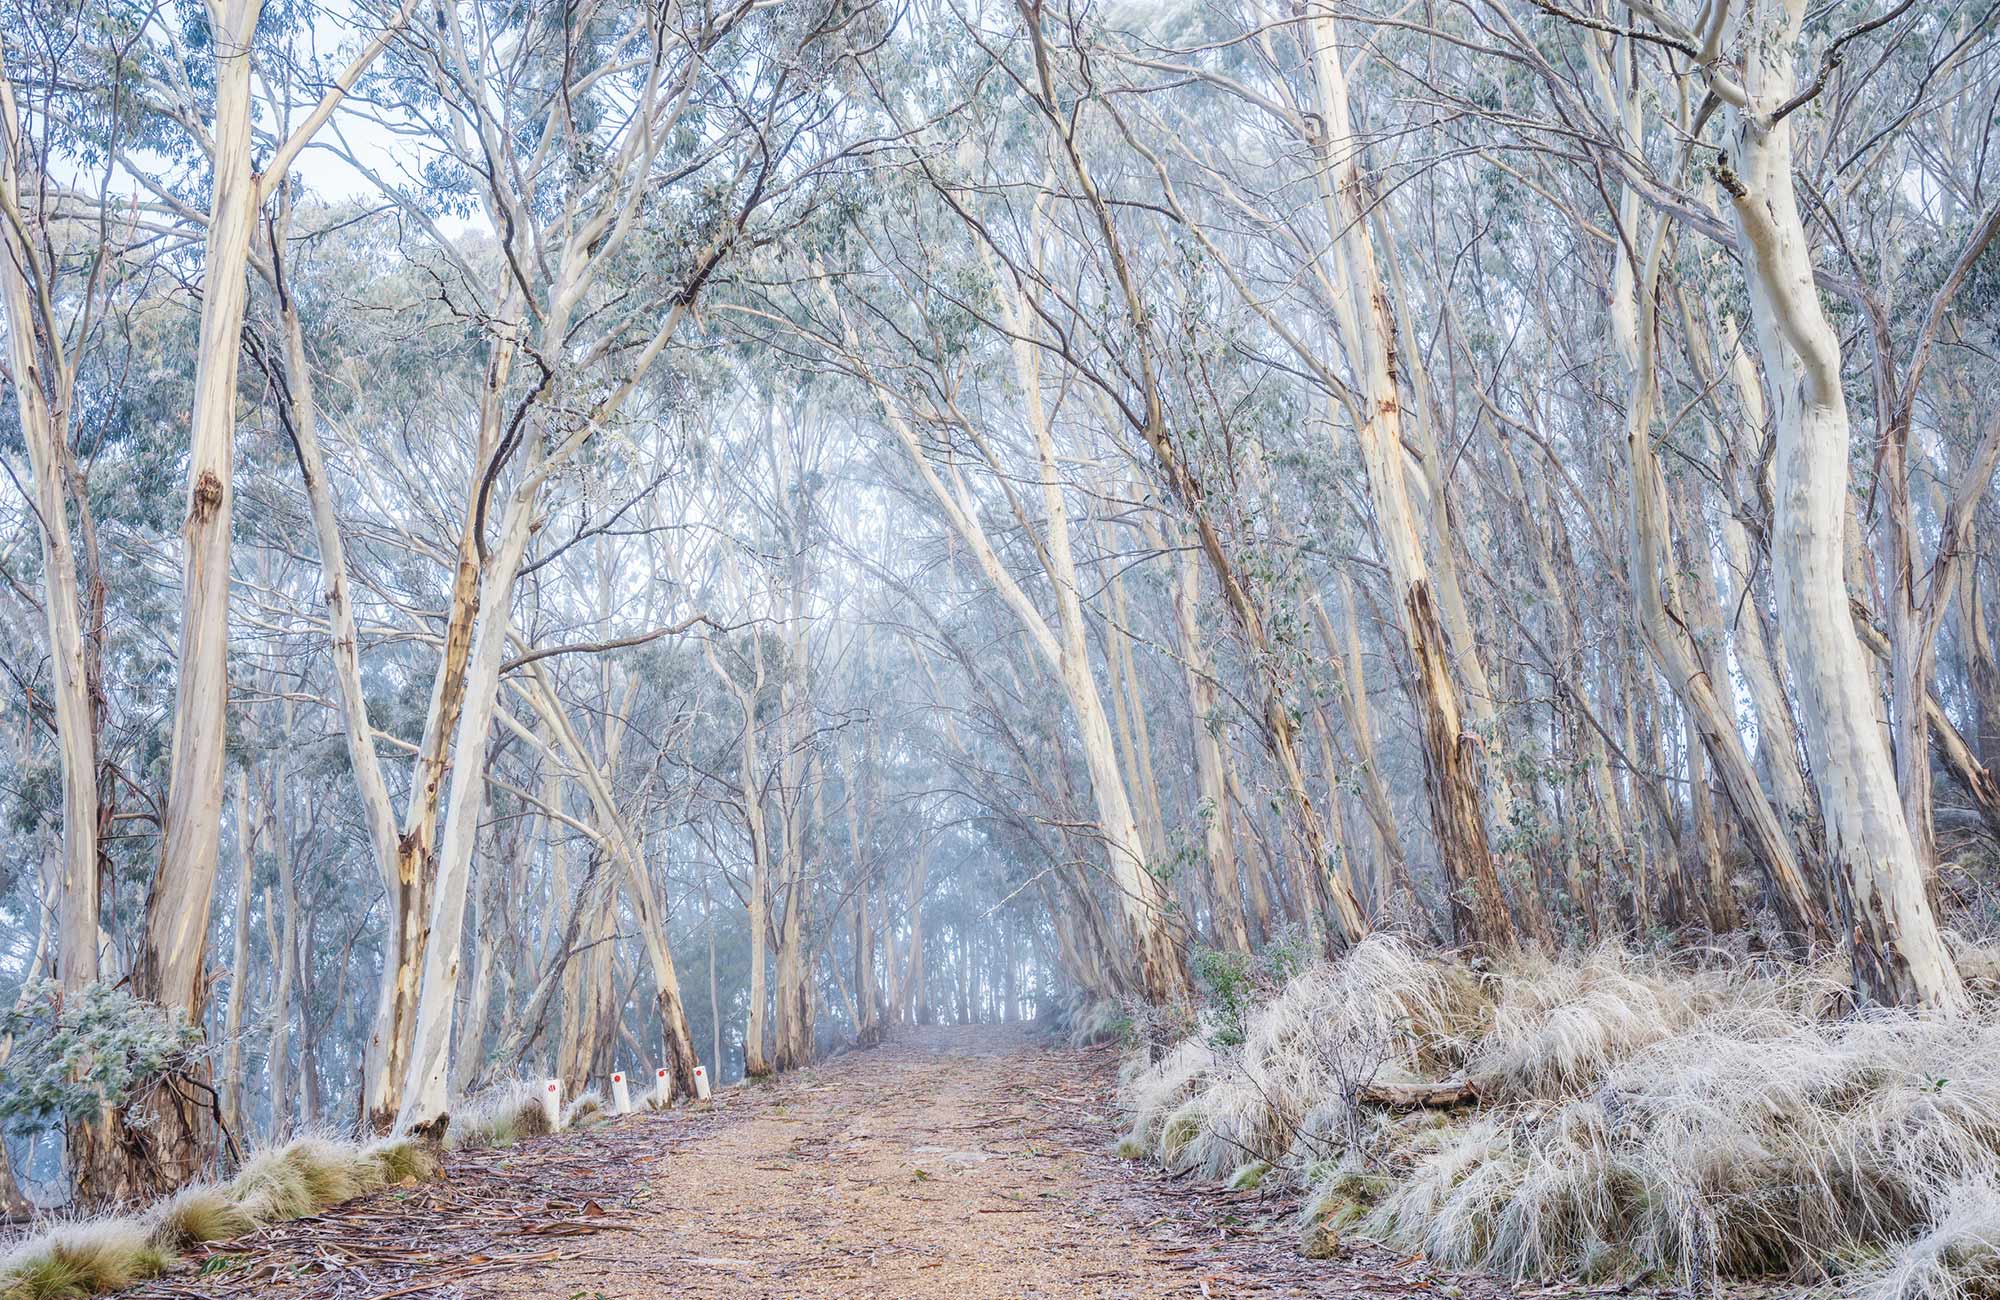 Light dusting of snow on trees in winter, Mount Kaputar National Park. Photo: Simone Cottrell/OEH